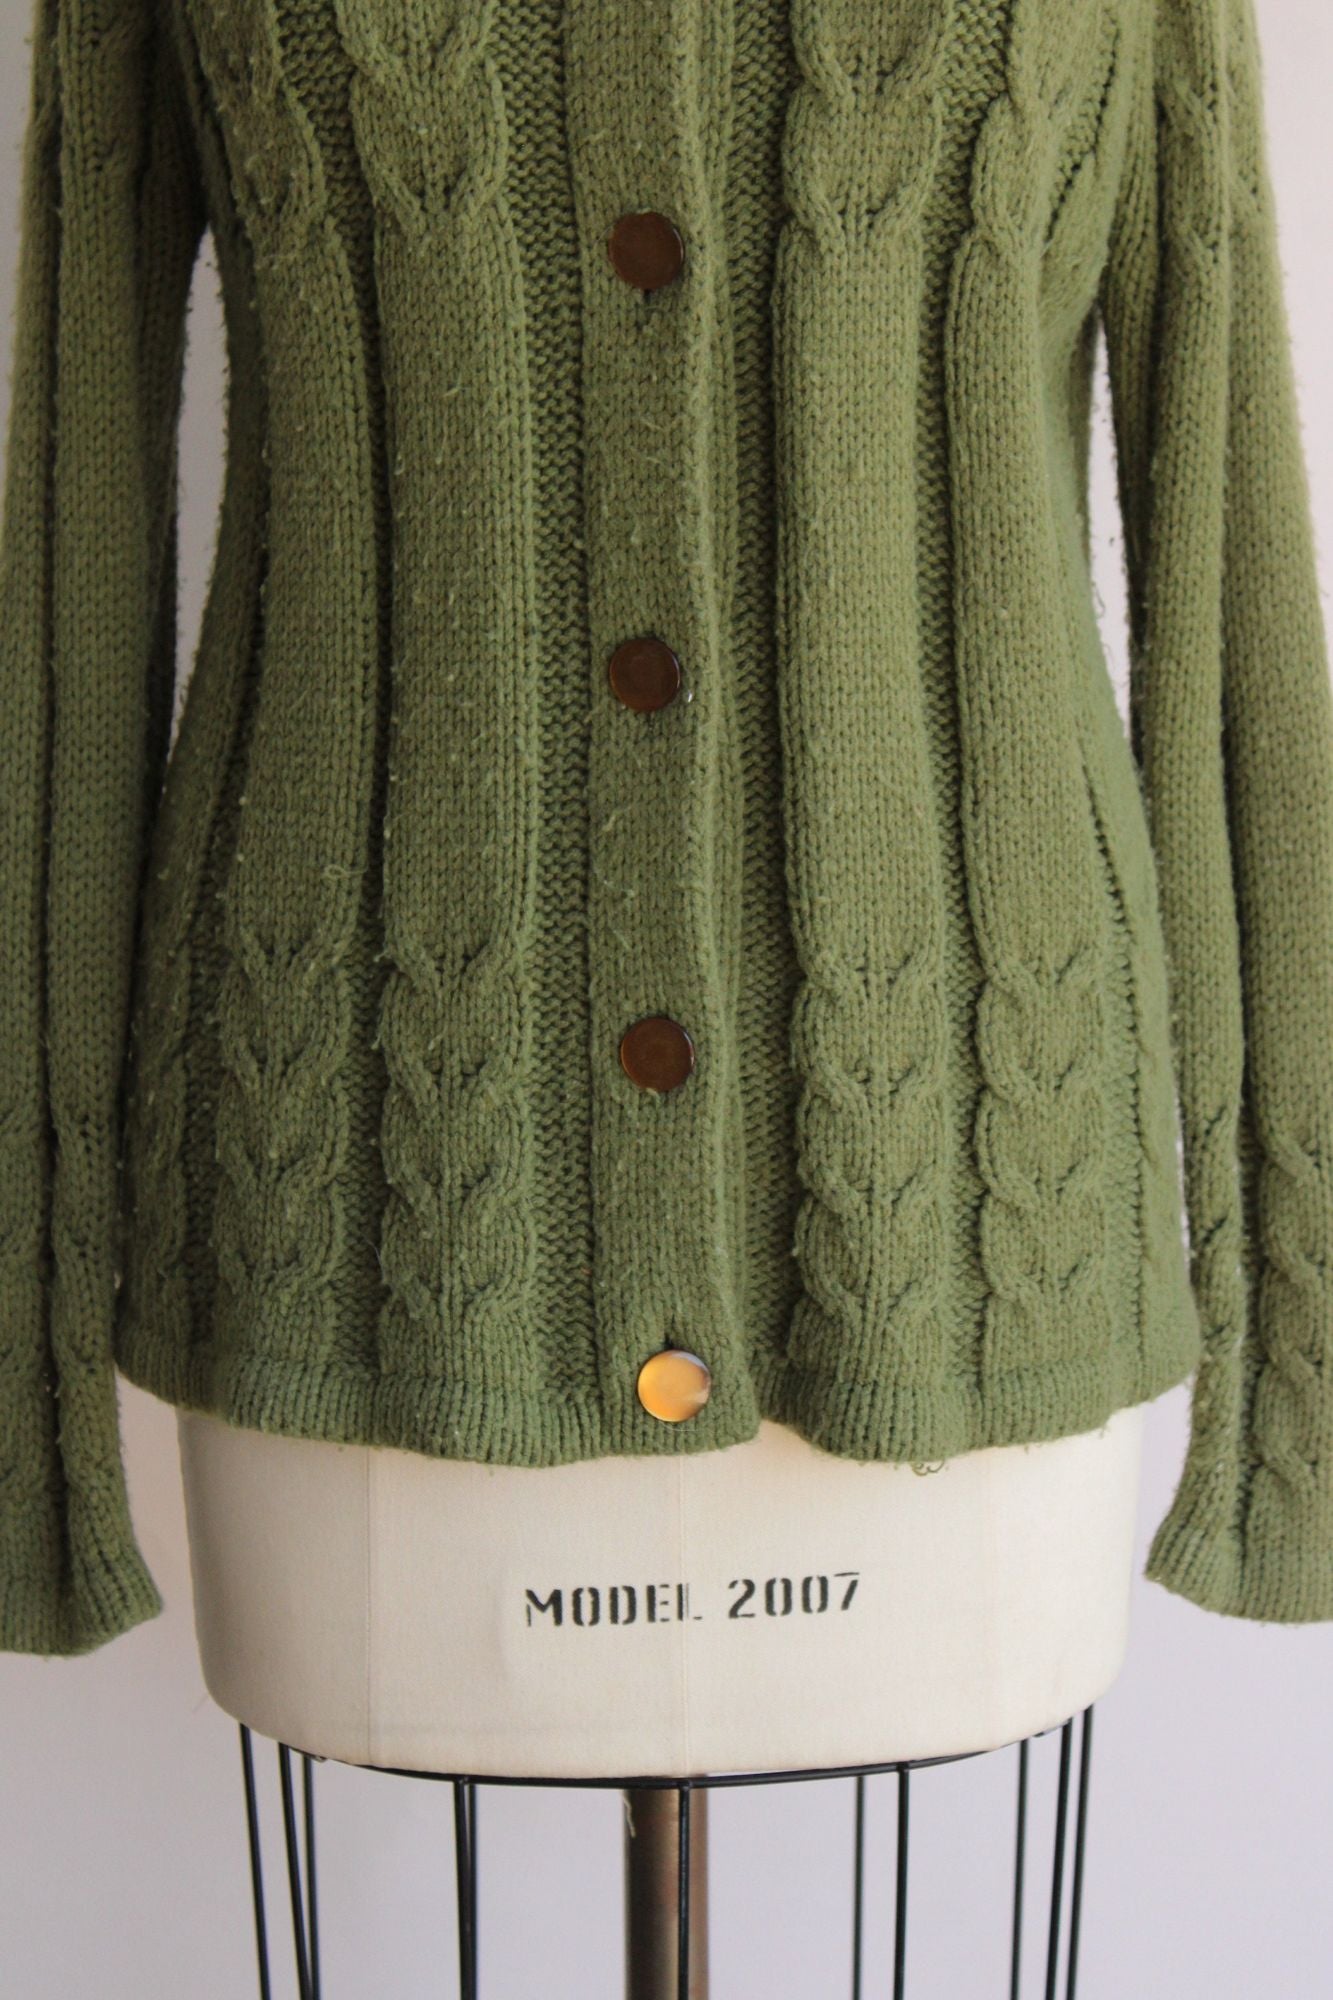 Vintage 1970s Cable Knit Green Cardigan with Pockets